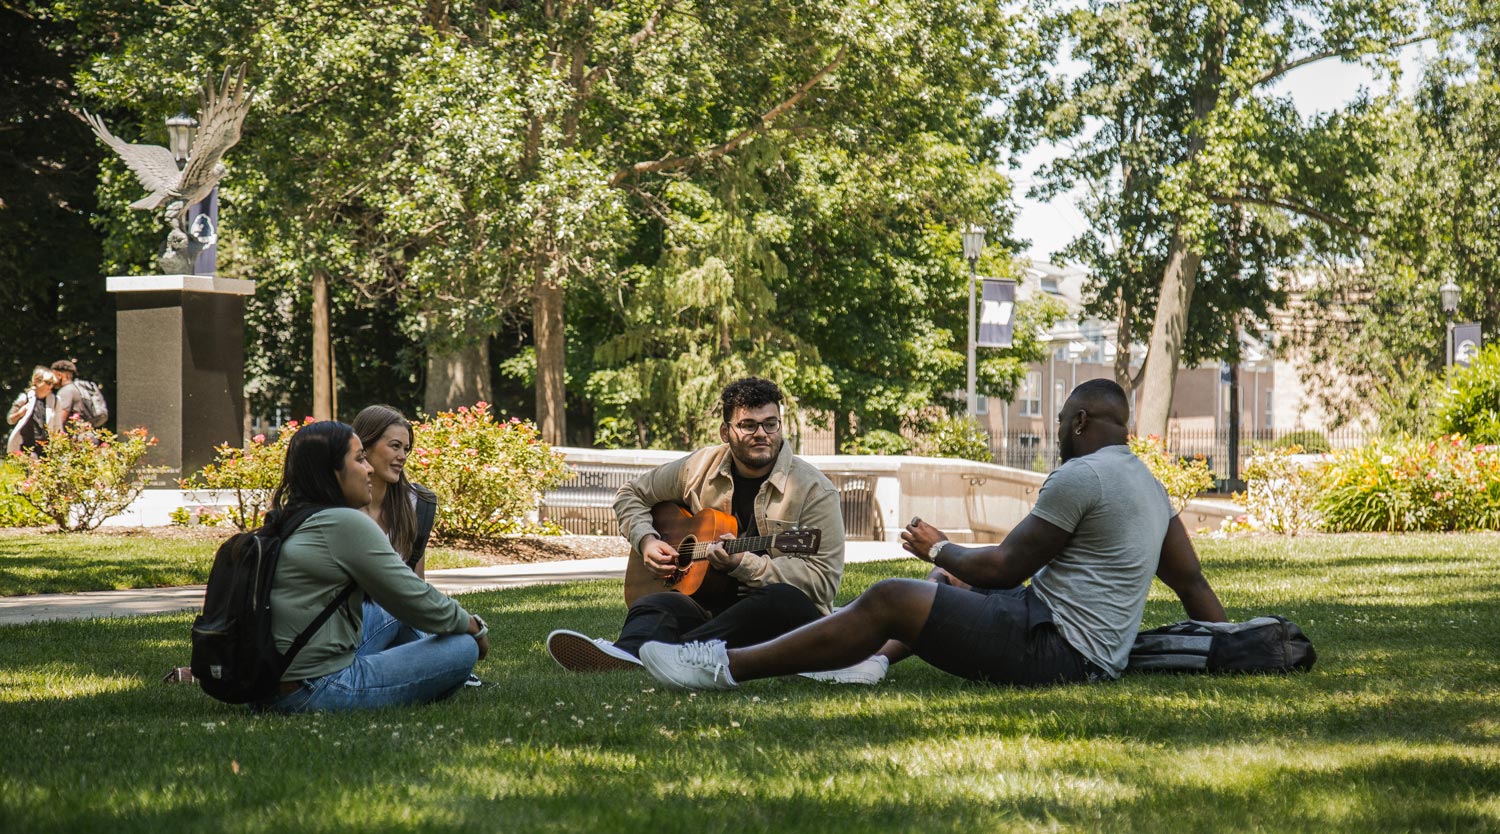 Students sitting in grass in circle with guitar